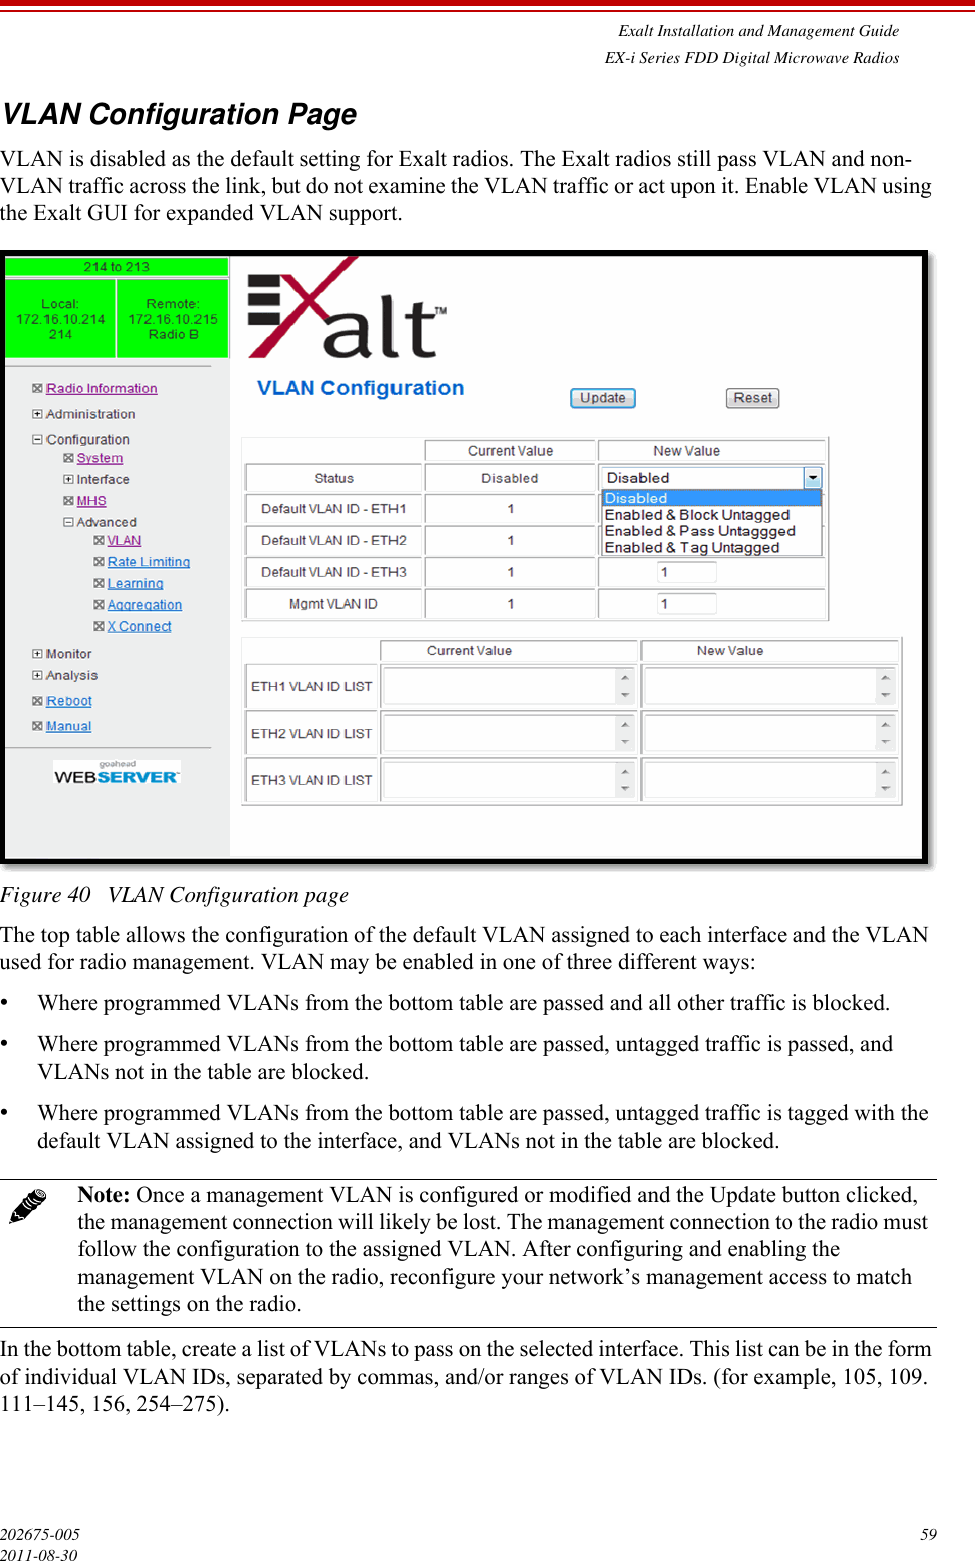 Exalt Installation and Management GuideEX-i Series FDD Digital Microwave Radios202675-005 592011-08-30VLAN Configuration PageVLAN is disabled as the default setting for Exalt radios. The Exalt radios still pass VLAN and non-VLAN traffic across the link, but do not examine the VLAN traffic or act upon it. Enable VLAN using the Exalt GUI for expanded VLAN support.Figure 40   VLAN Configuration pageThe top table allows the configuration of the default VLAN assigned to each interface and the VLAN used for radio management. VLAN may be enabled in one of three different ways:•Where programmed VLANs from the bottom table are passed and all other traffic is blocked.•Where programmed VLANs from the bottom table are passed, untagged traffic is passed, and VLANs not in the table are blocked.•Where programmed VLANs from the bottom table are passed, untagged traffic is tagged with the default VLAN assigned to the interface, and VLANs not in the table are blocked.In the bottom table, create a list of VLANs to pass on the selected interface. This list can be in the form of individual VLAN IDs, separated by commas, and/or ranges of VLAN IDs. (for example, 105, 109. 111–145, 156, 254–275).Note: Once a management VLAN is configured or modified and the Update button clicked, the management connection will likely be lost. The management connection to the radio must follow the configuration to the assigned VLAN. After configuring and enabling the management VLAN on the radio, reconfigure your network’s management access to match the settings on the radio.